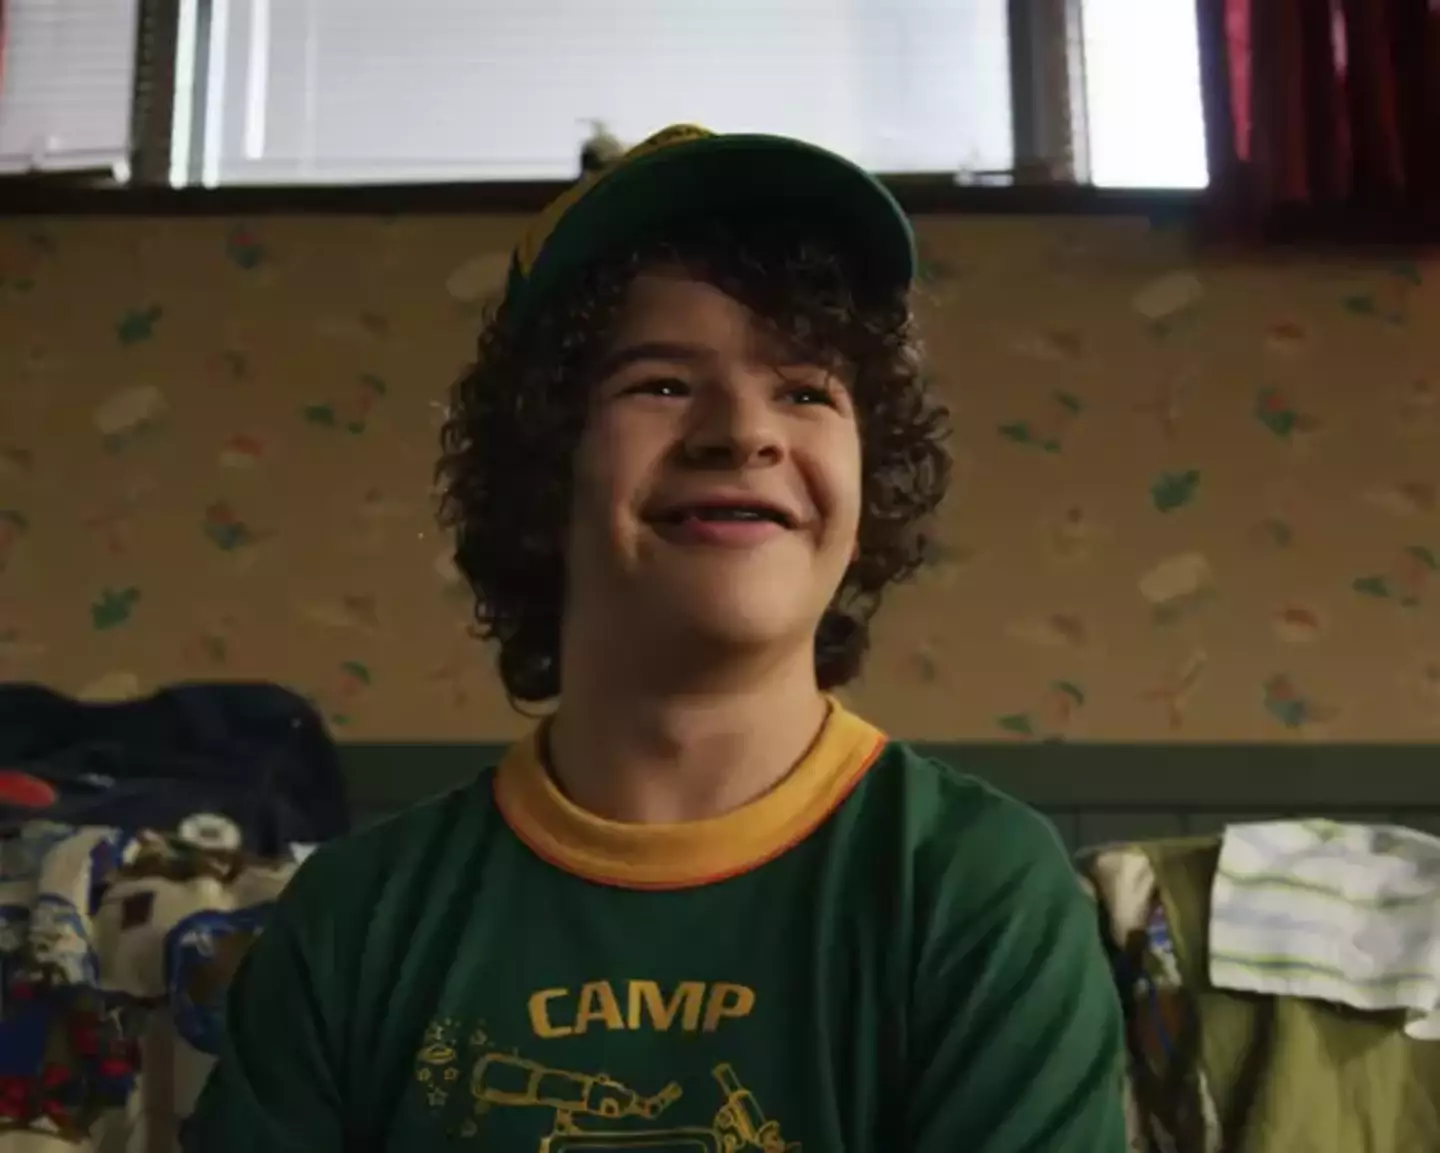 On-screen, he's best known to the world as his character Dustin - a faithful friend and bestie/brother figure to Steve Harrington.